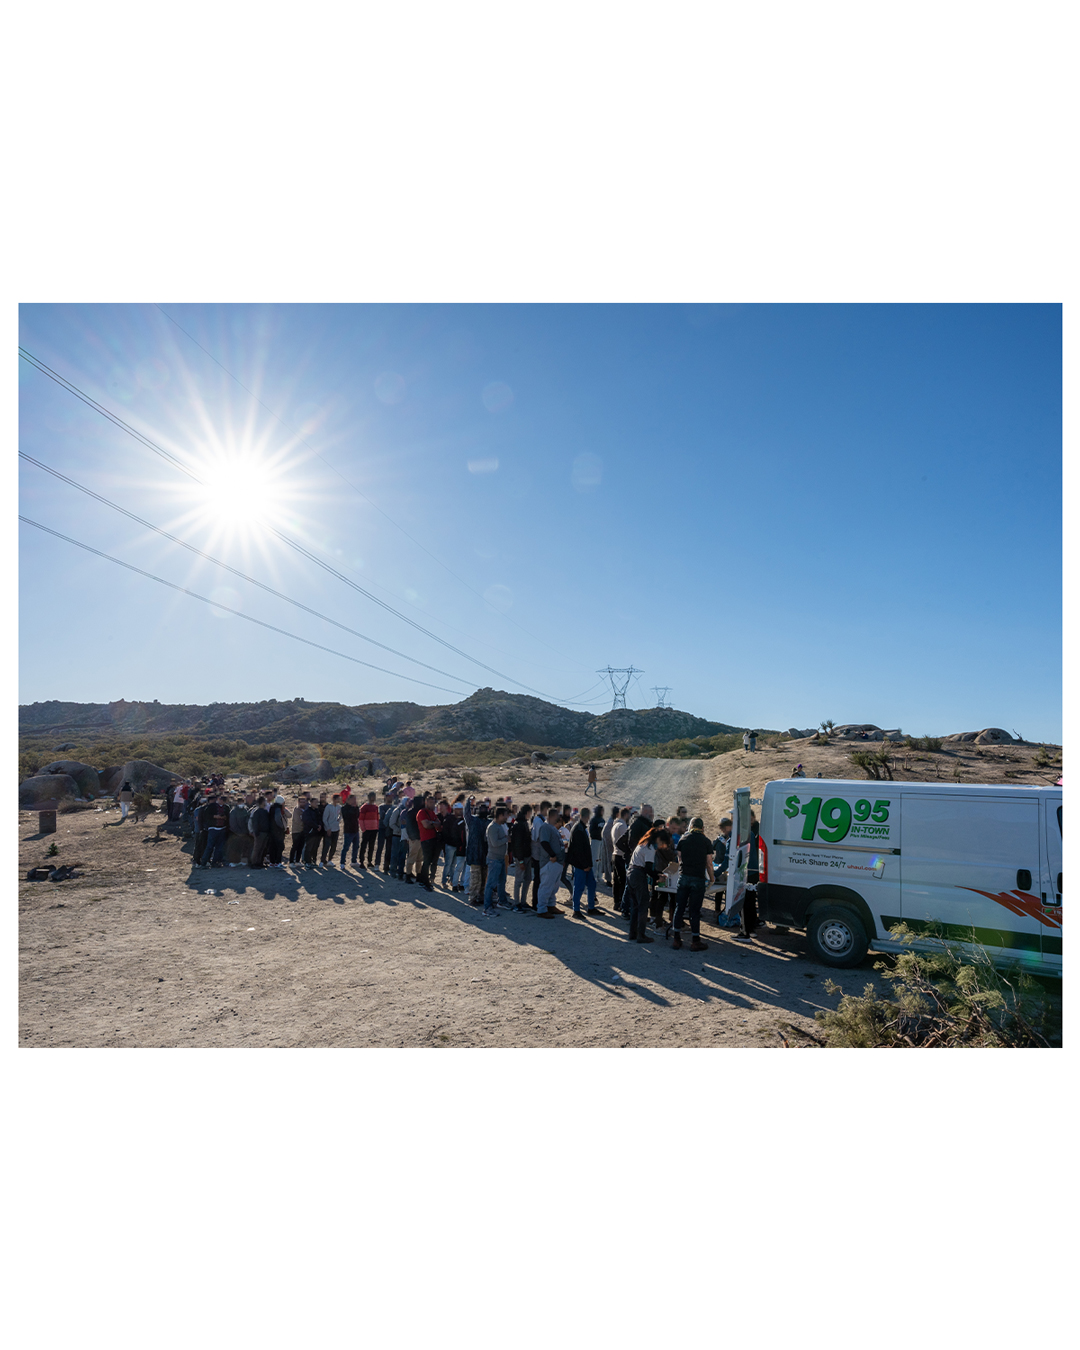 A bright sun shines in the upper left corner. Under the sun, a line of migrants snakes into the distance, as they wait behind a U-Haul truck staffed by volunteers handing out aid. Power lines cross the empty desert and the dirt road the volunteers are parked along.